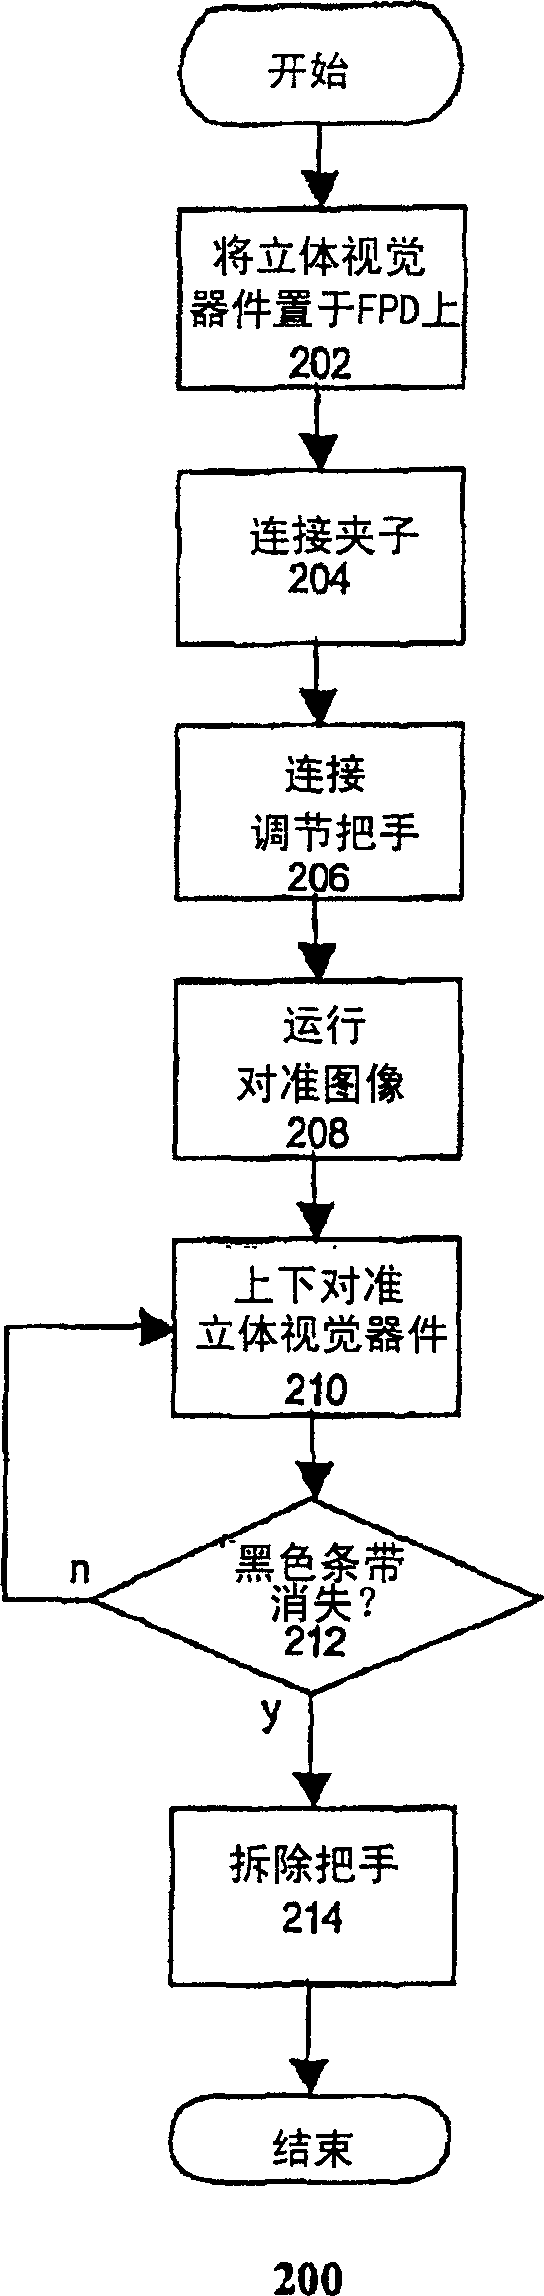 Method and apparatus for easy attachment and alignment of stereoscopic vision enabling devices